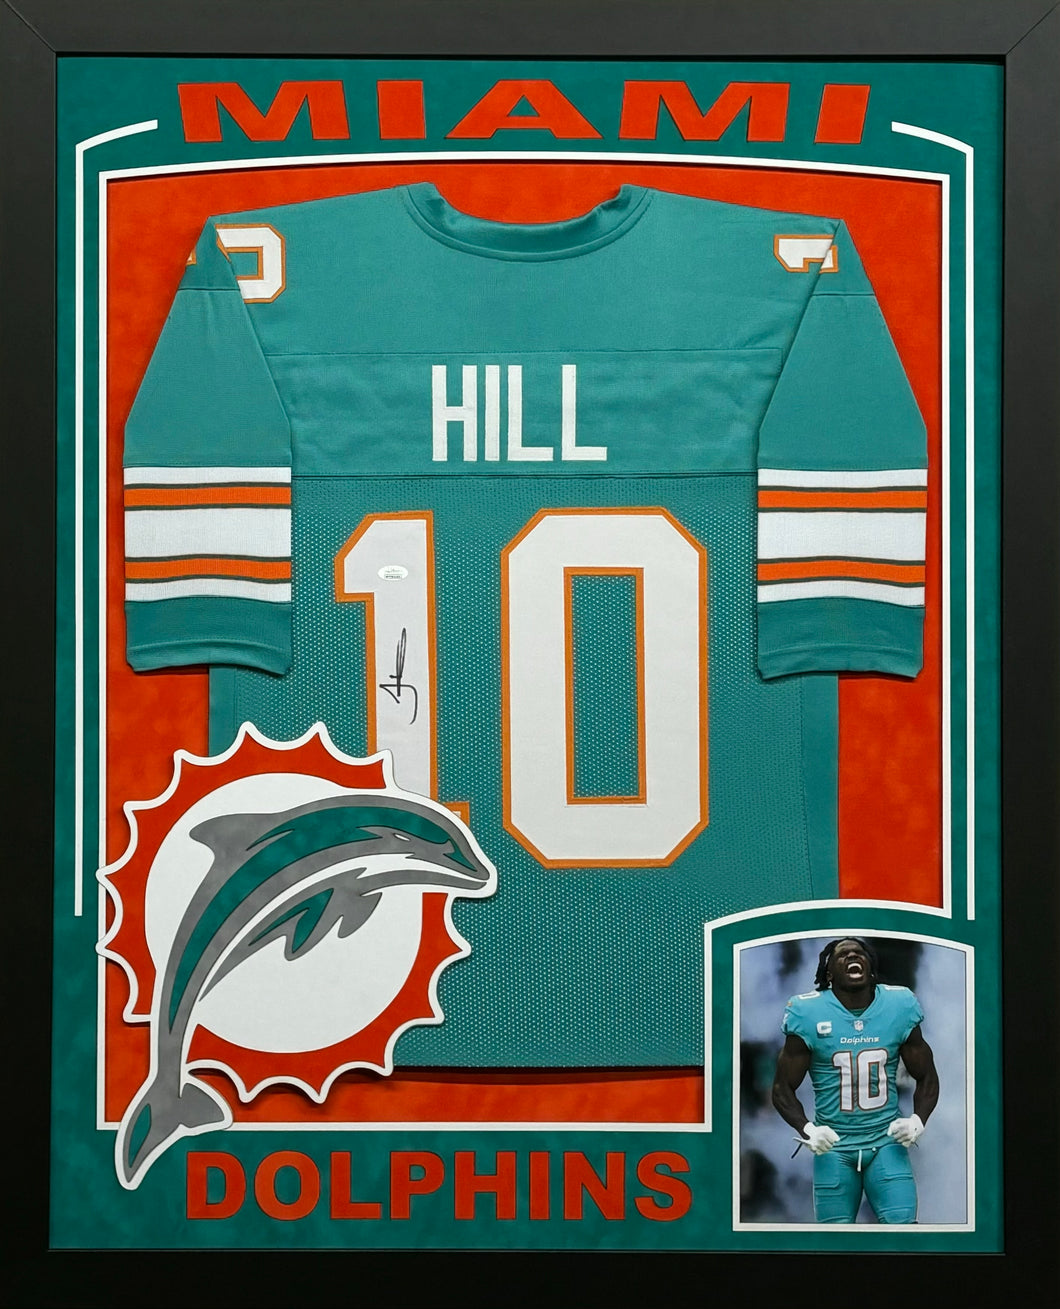 Miami Dolphins Tyreek Hill Signed Teal Jersey Framed & Suede Matted with XL 3D Logo & Team Name Cutout JSA COA